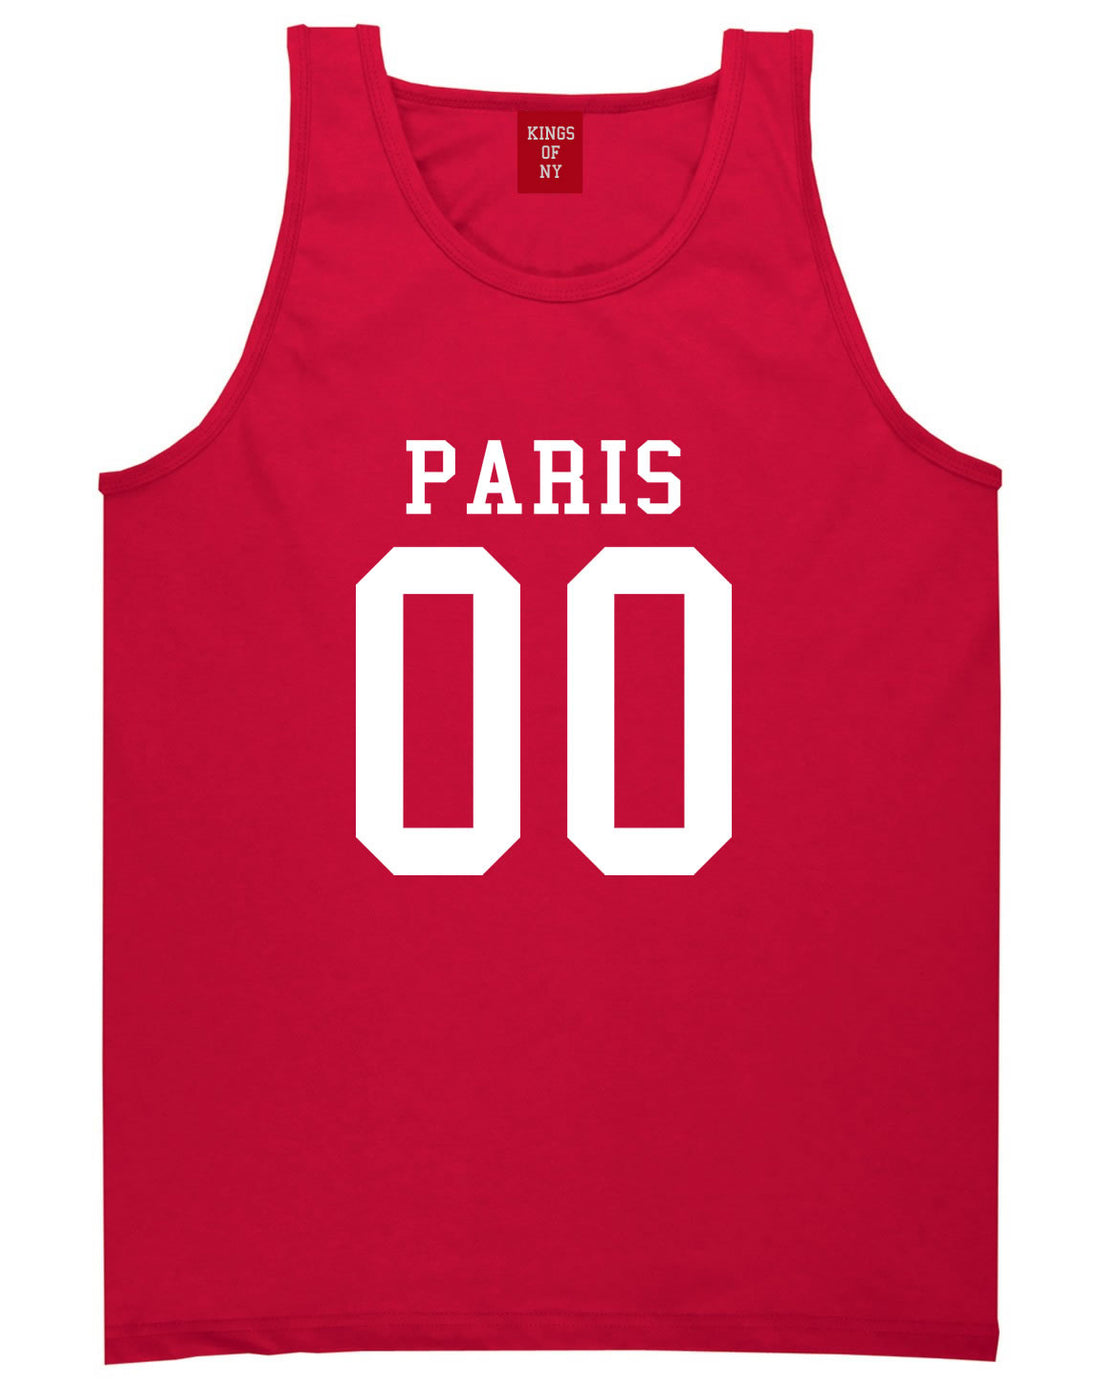 Paris Team 00 Jersey Tank Top in Red By Kings Of NY